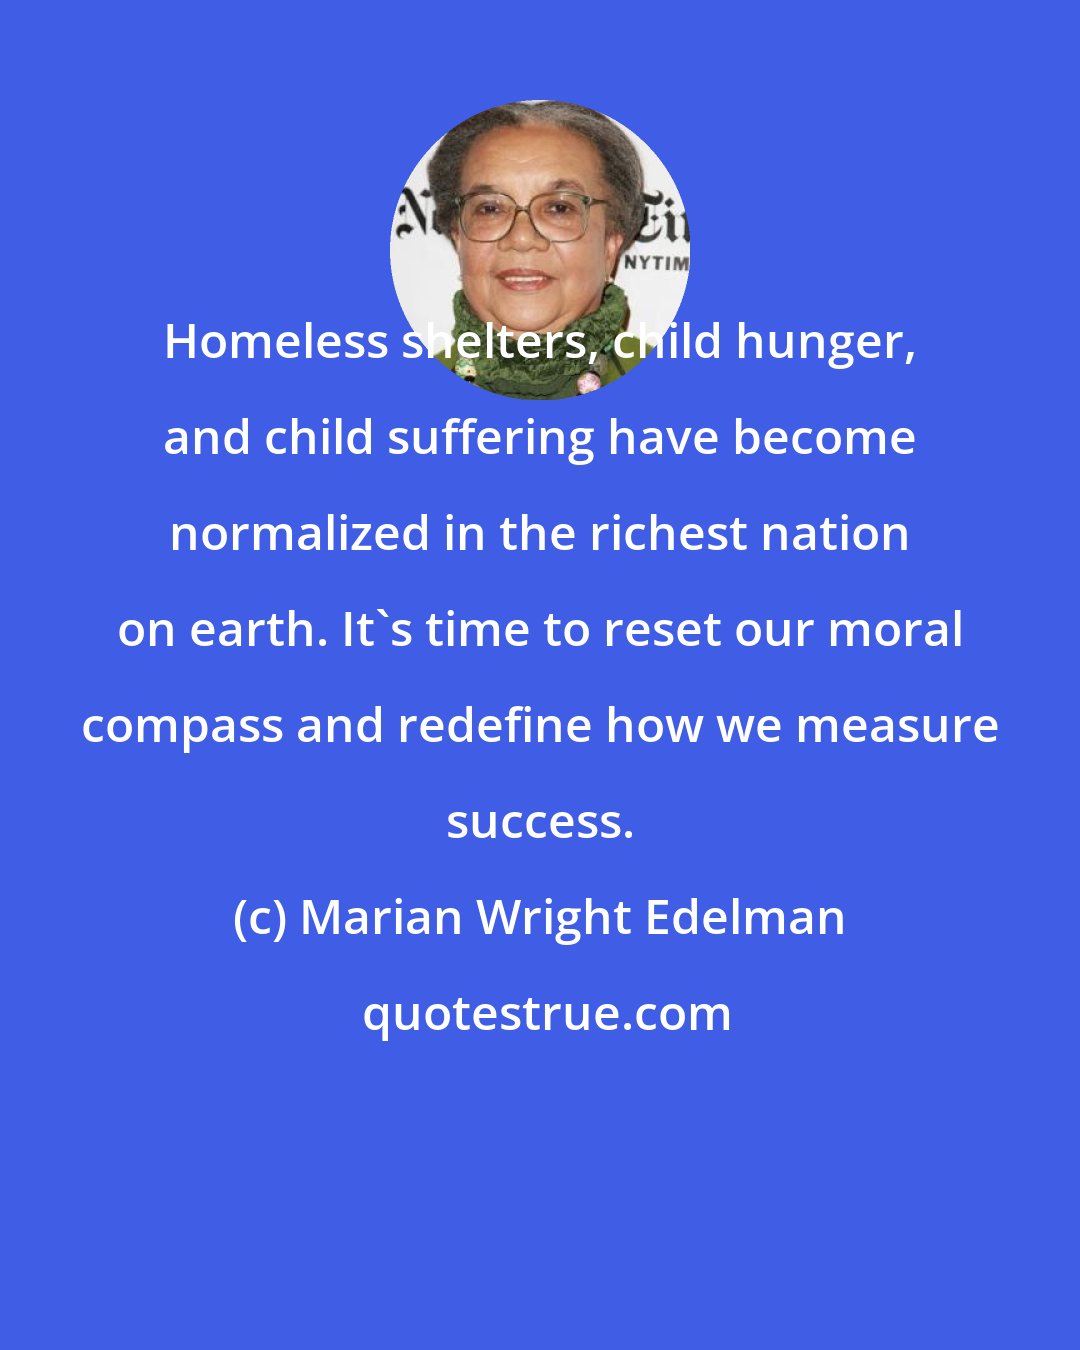 Marian Wright Edelman: Homeless shelters, child hunger, and child suffering have become normalized in the richest nation on earth. It's time to reset our moral compass and redefine how we measure success.